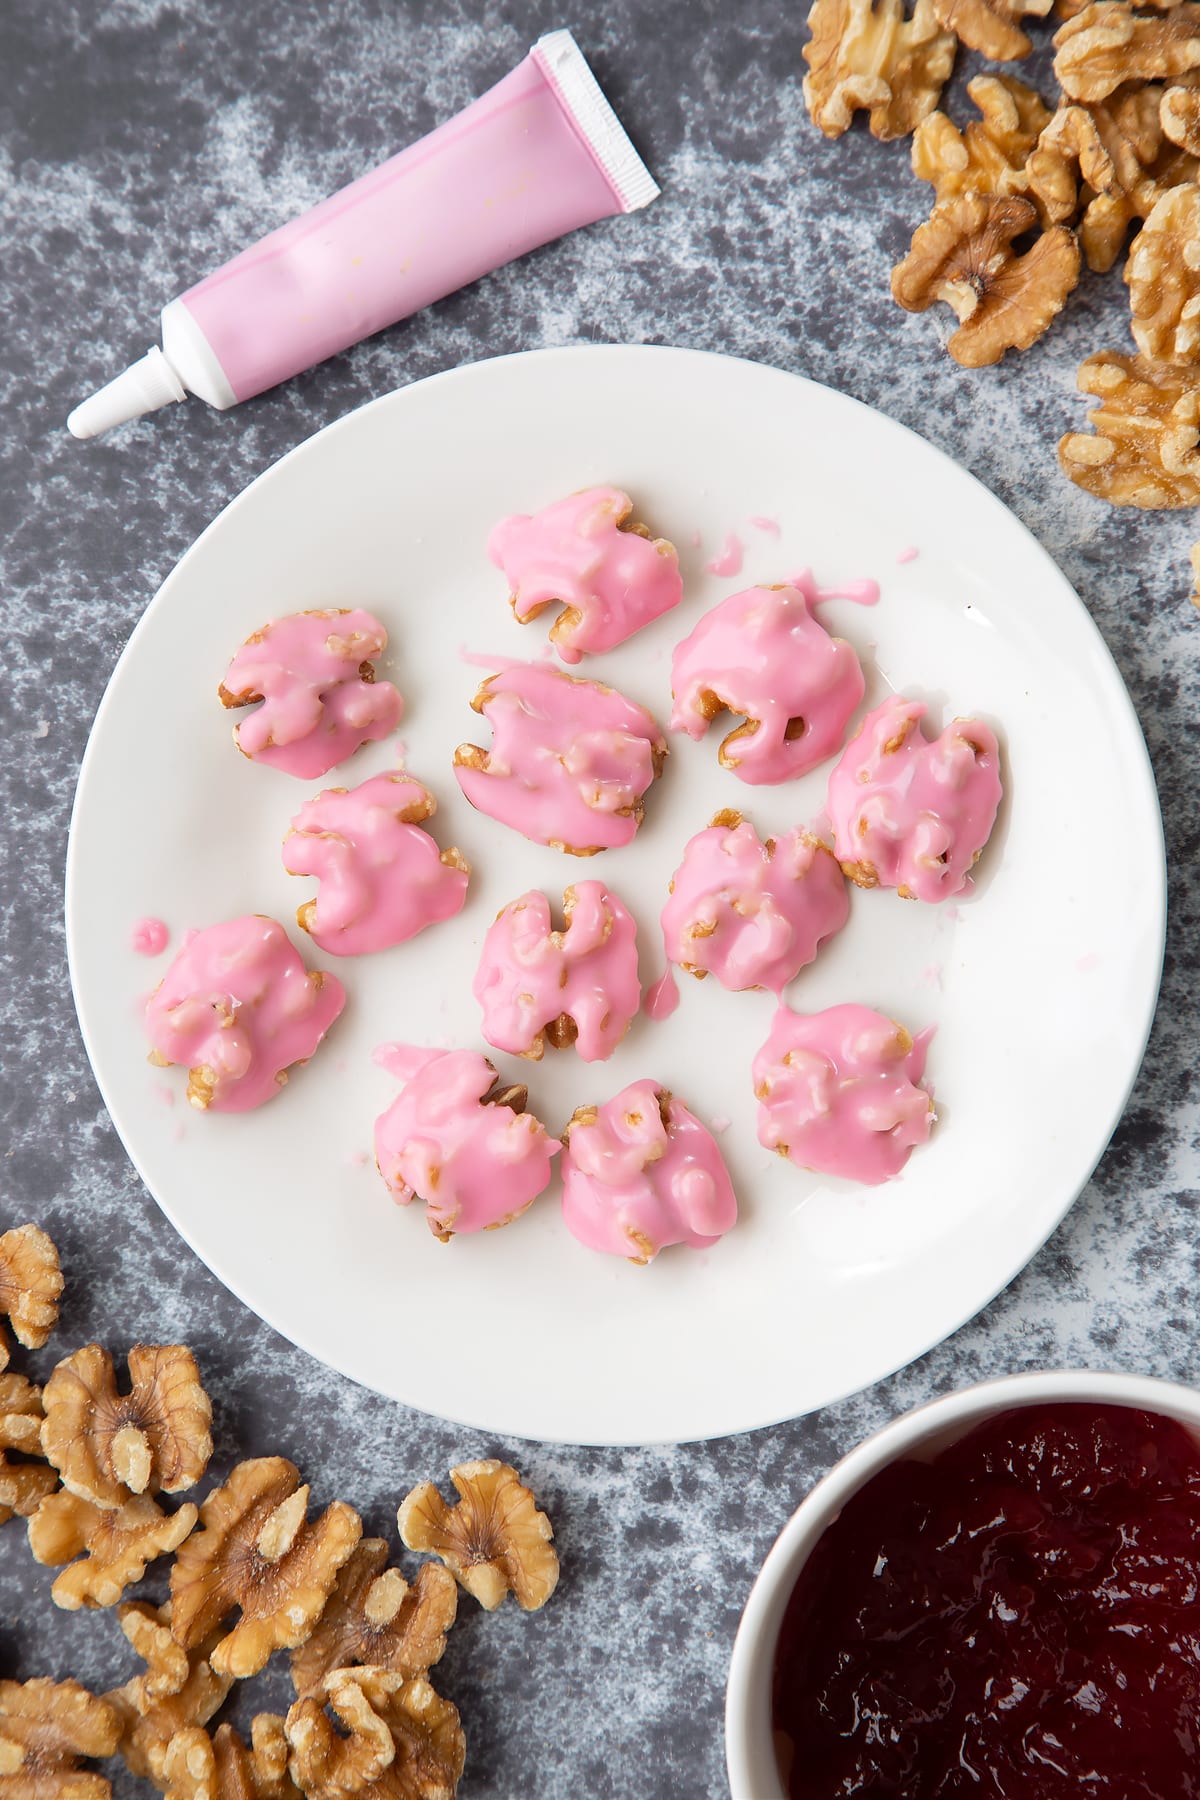 Walnuts on a white plate, painted with pink icing. Ingredients to make gory Halloween cupcakes surround them.